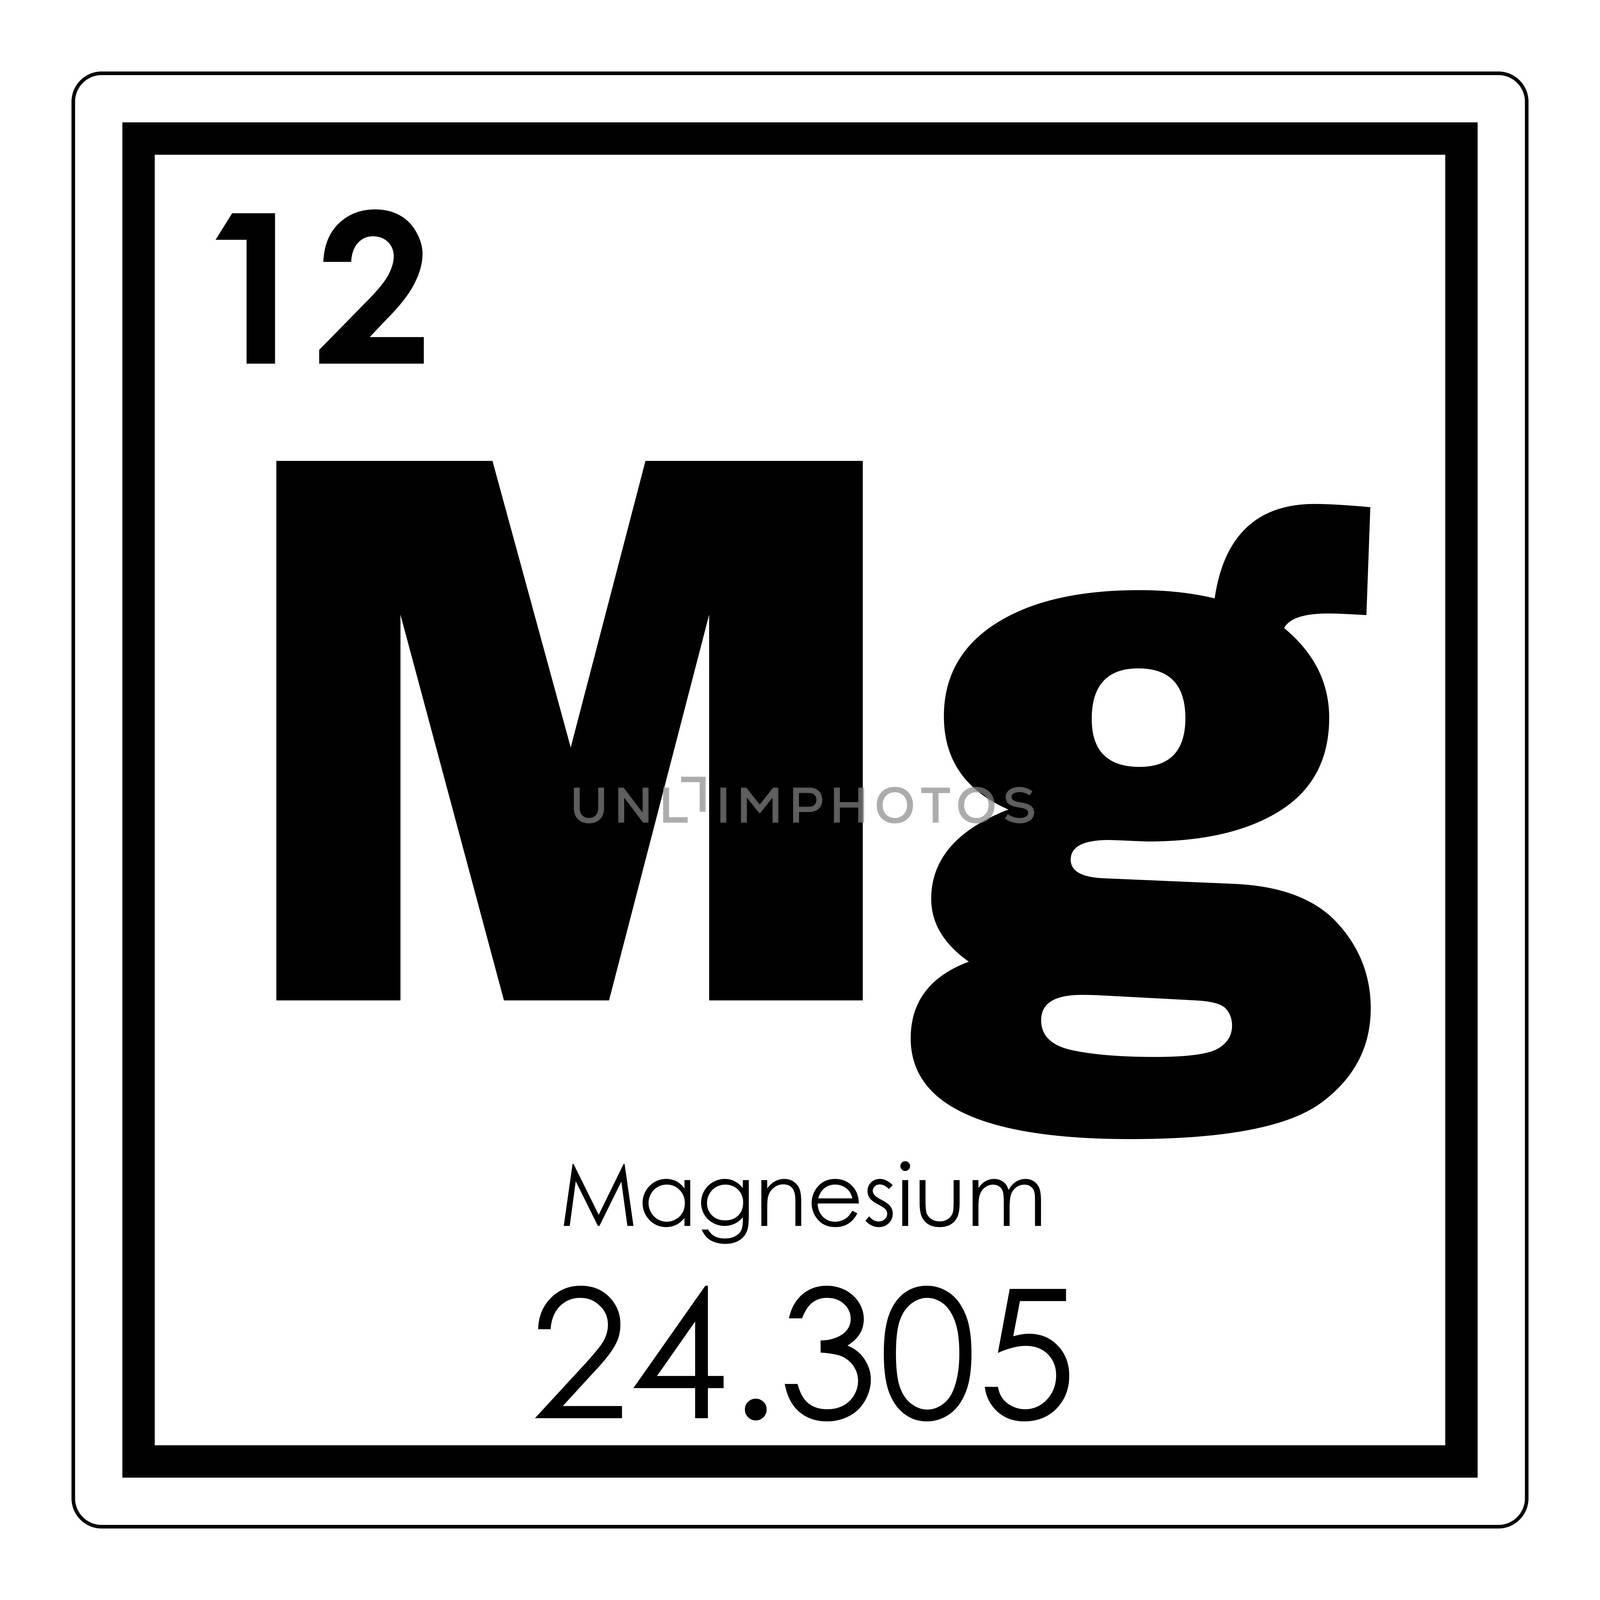 Magnesium chemical element by tony4urban